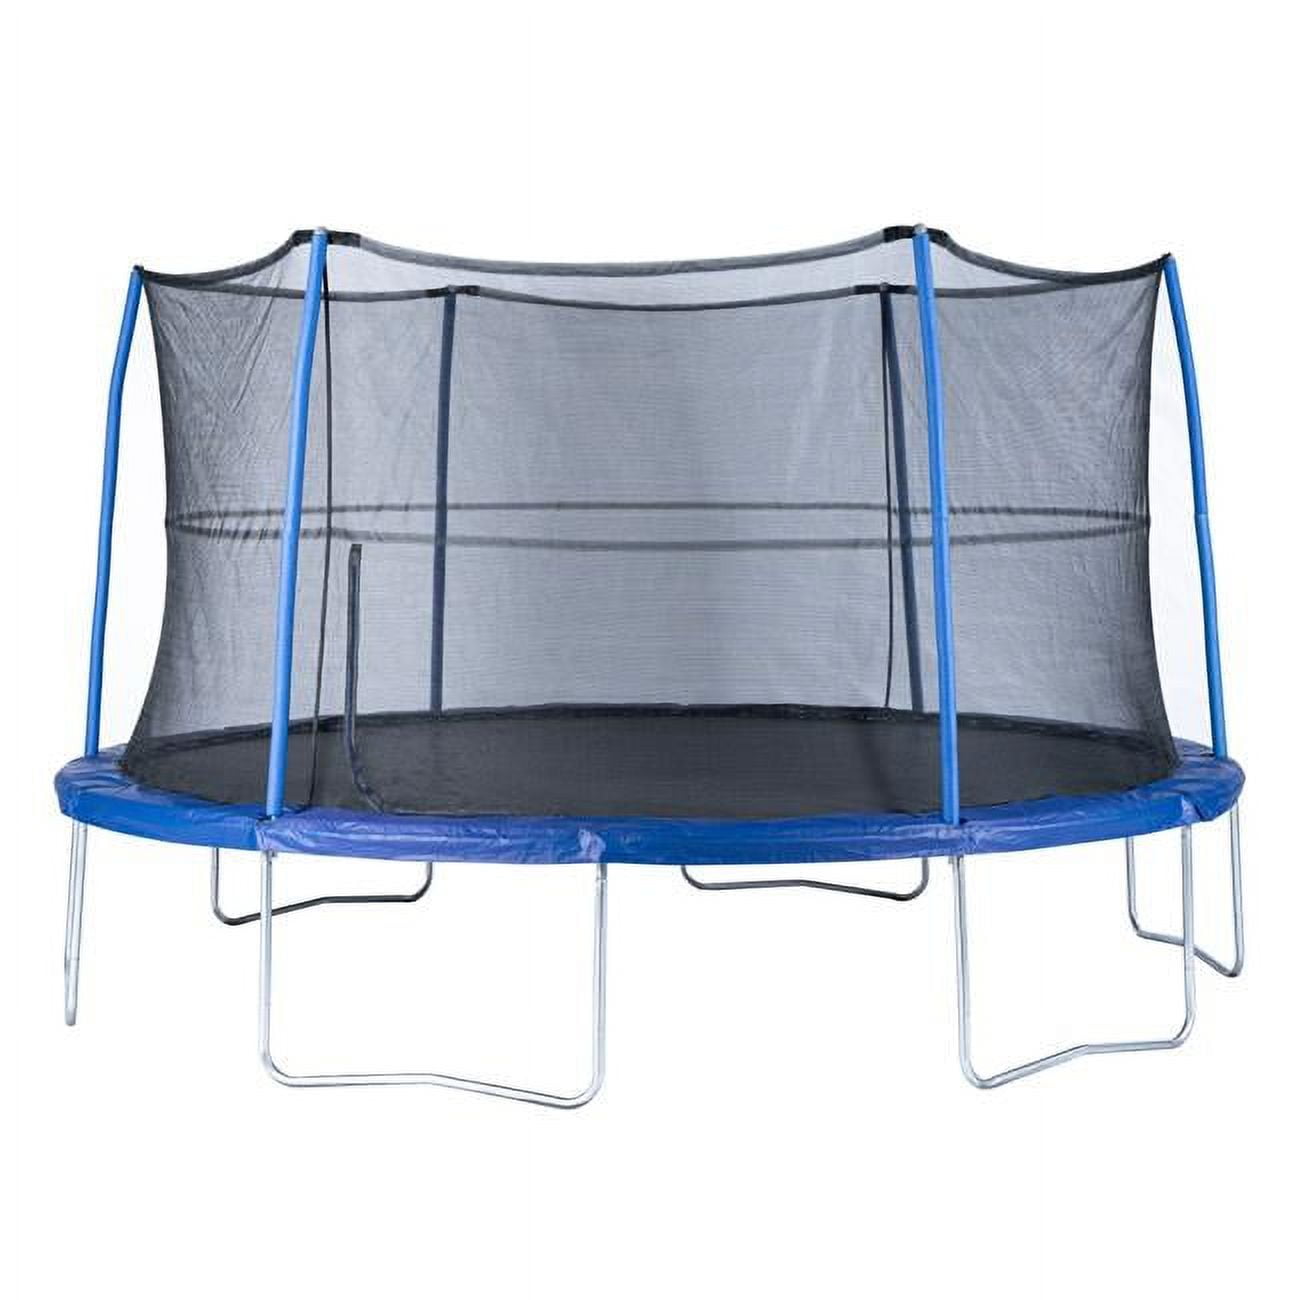 Picture of JumpKing JK146PC JumpKing 14ft Round Combo